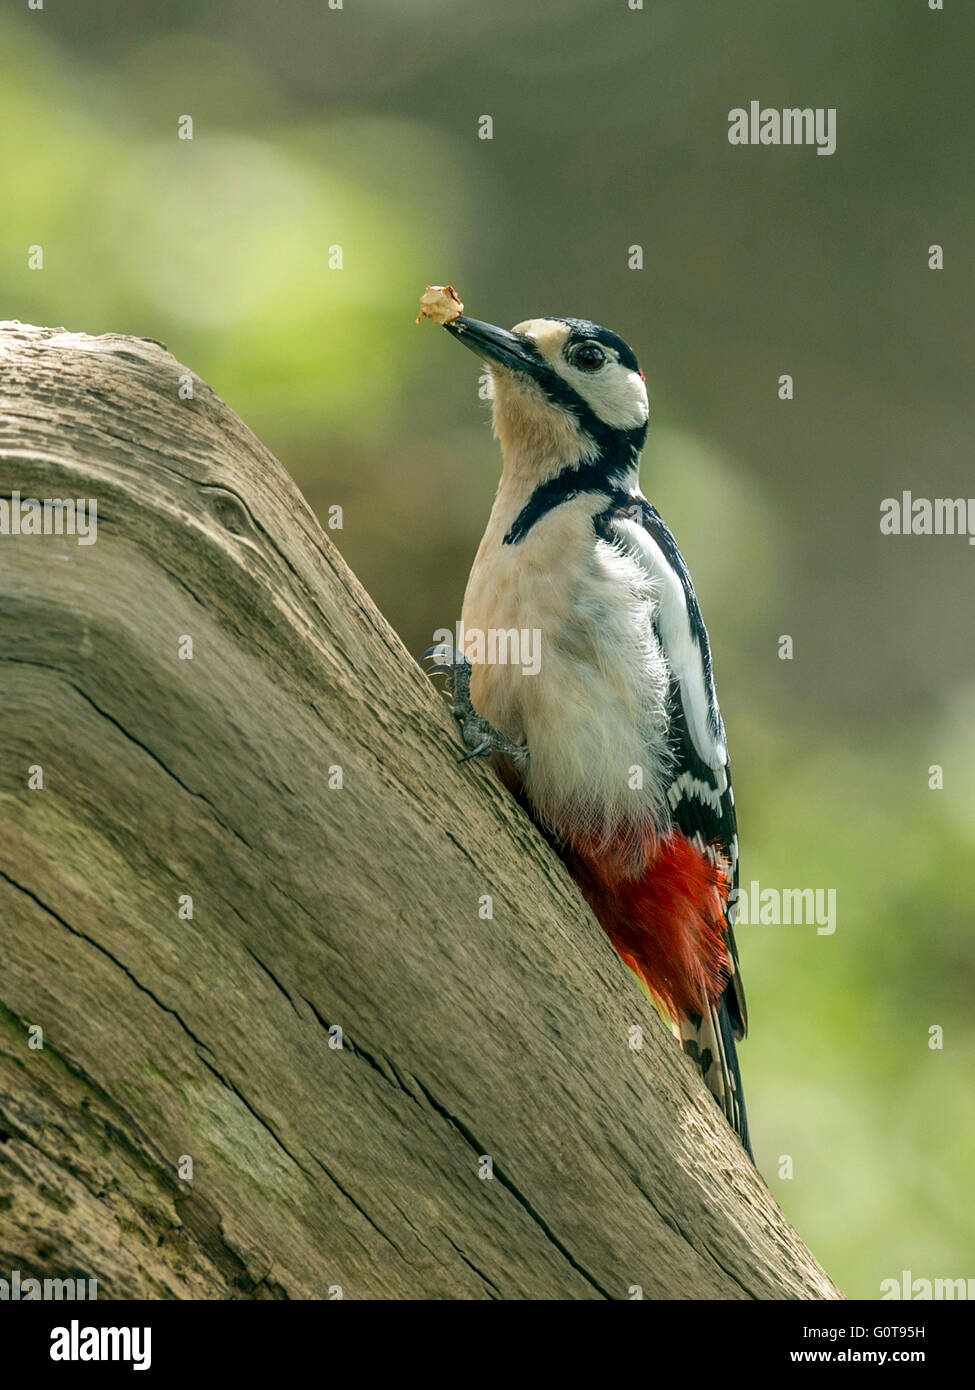 Male Great Spotted Woodpecker (Dendrocopos major) foraging in natural woodland setting. Perched, isolated against background. Stock Photo